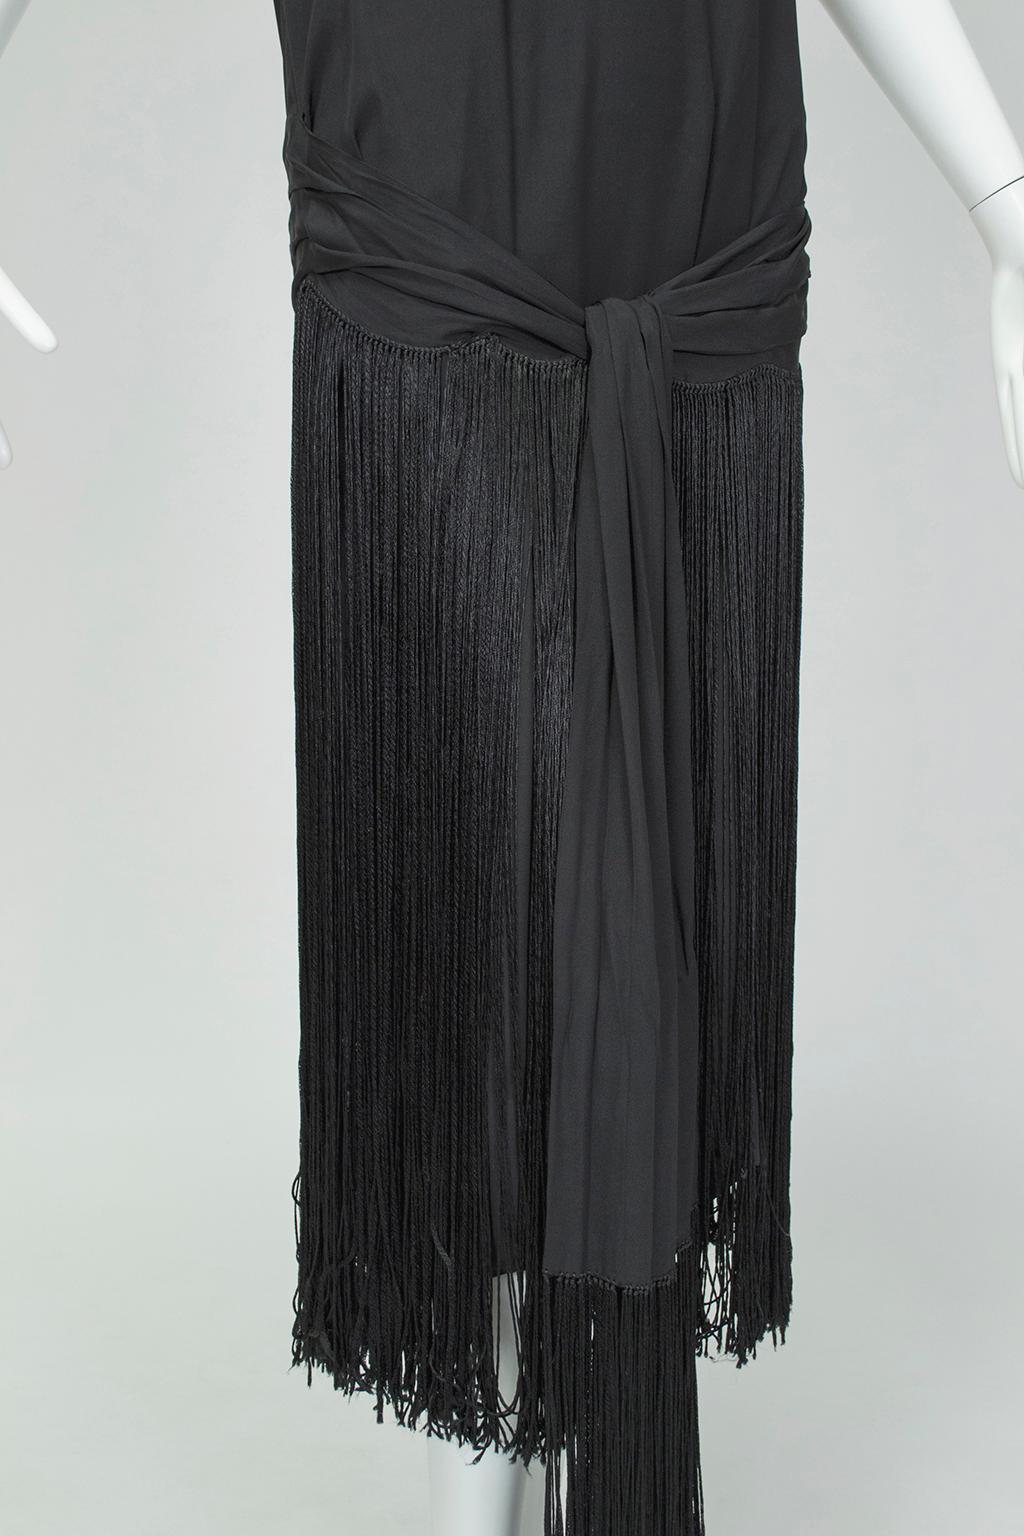 Black *Large Size* Jazz Baby Backless Fringed Wrapping Flapper Dress- M-L, 1920s In Good Condition For Sale In Tucson, AZ